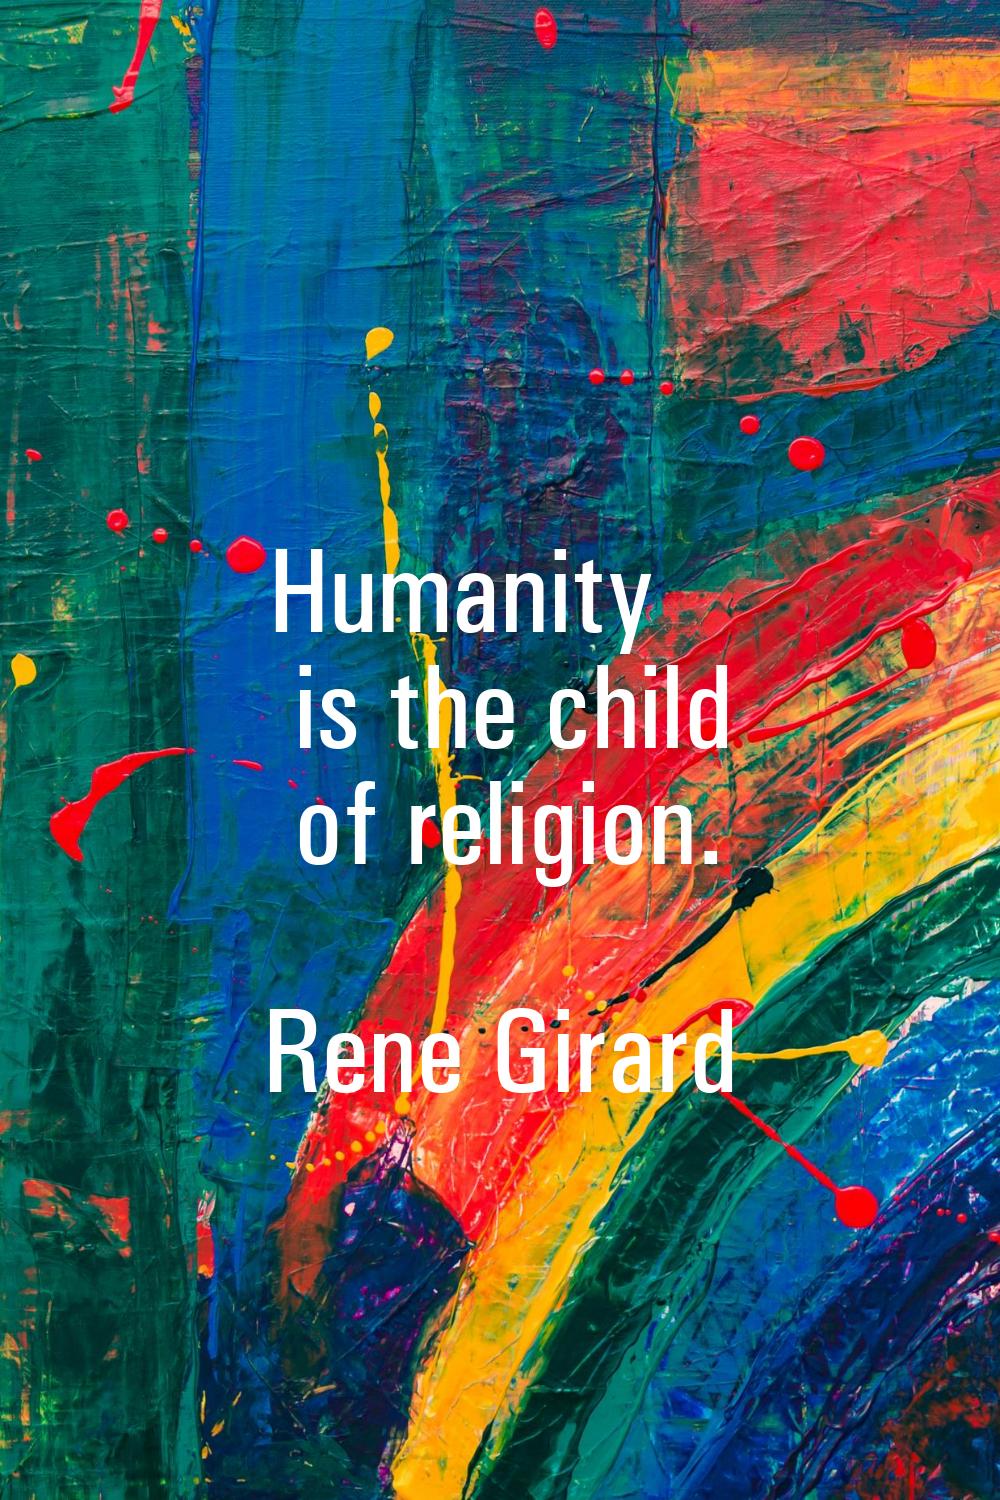 Humanity is the child of religion.